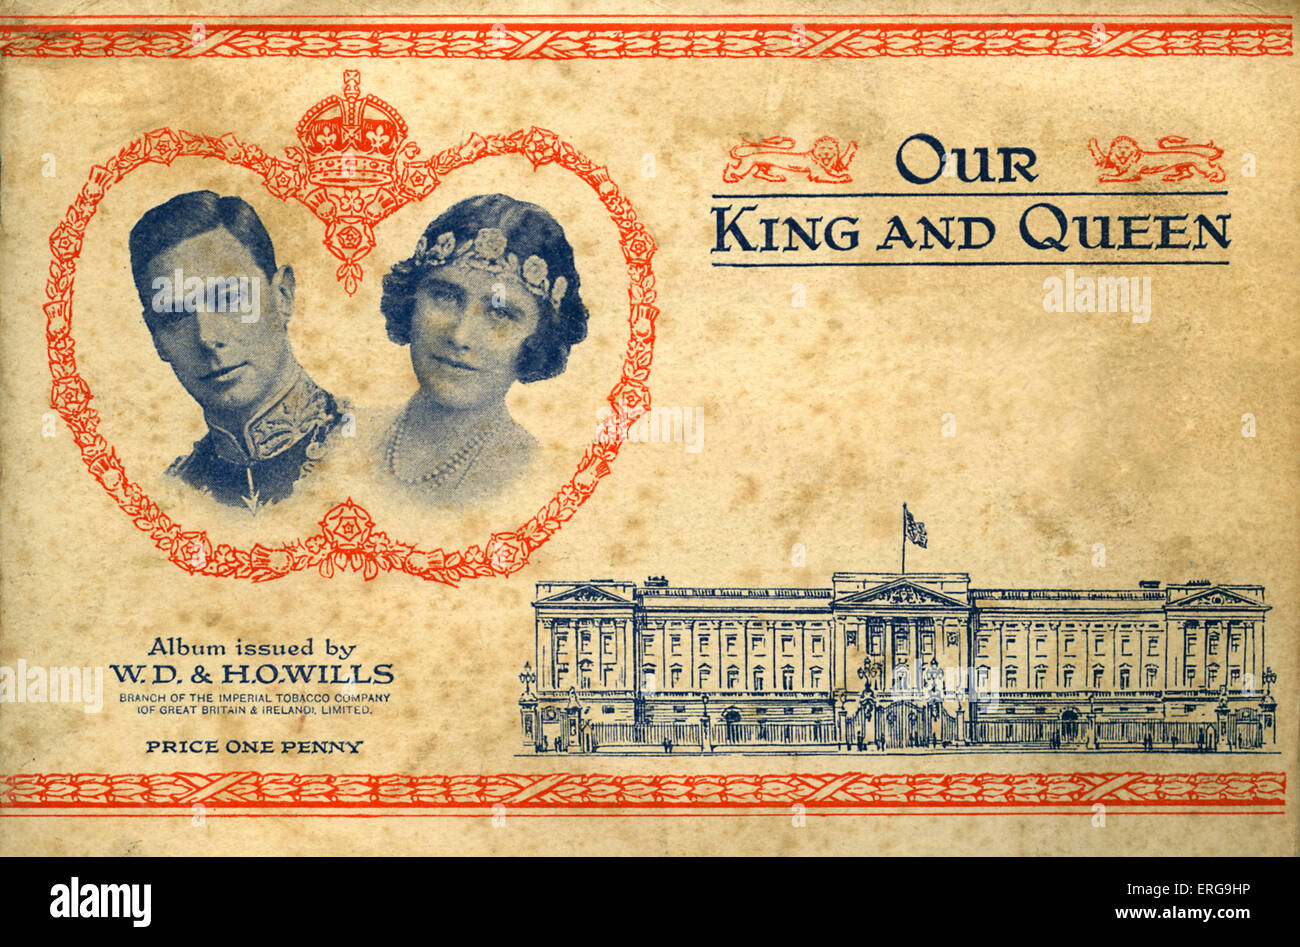 Our King and Queen. Cover of album published by W. D. &, H.O. Wills to commemorate coronation of King George VI, 12 May 1937. Stock Photo